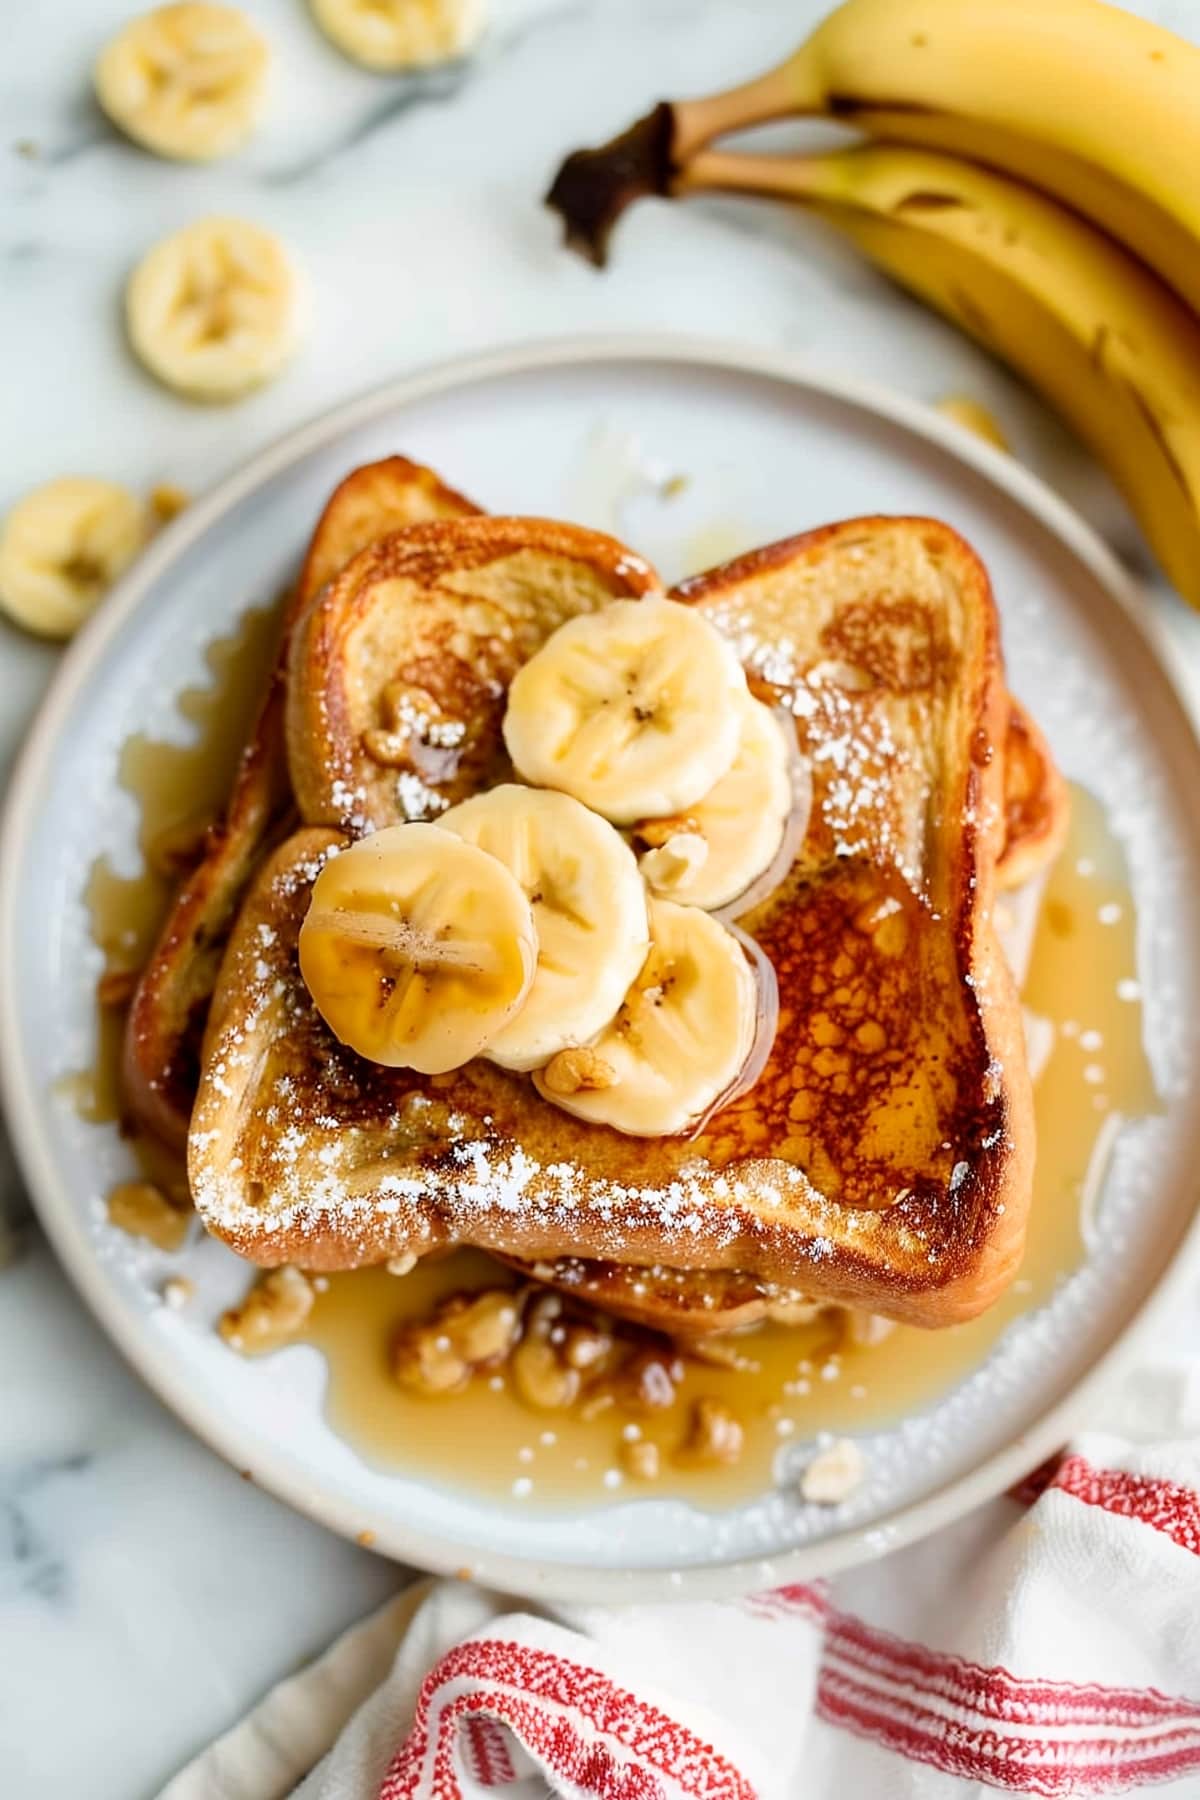 Top view of homemade banana french toast with cinnamon